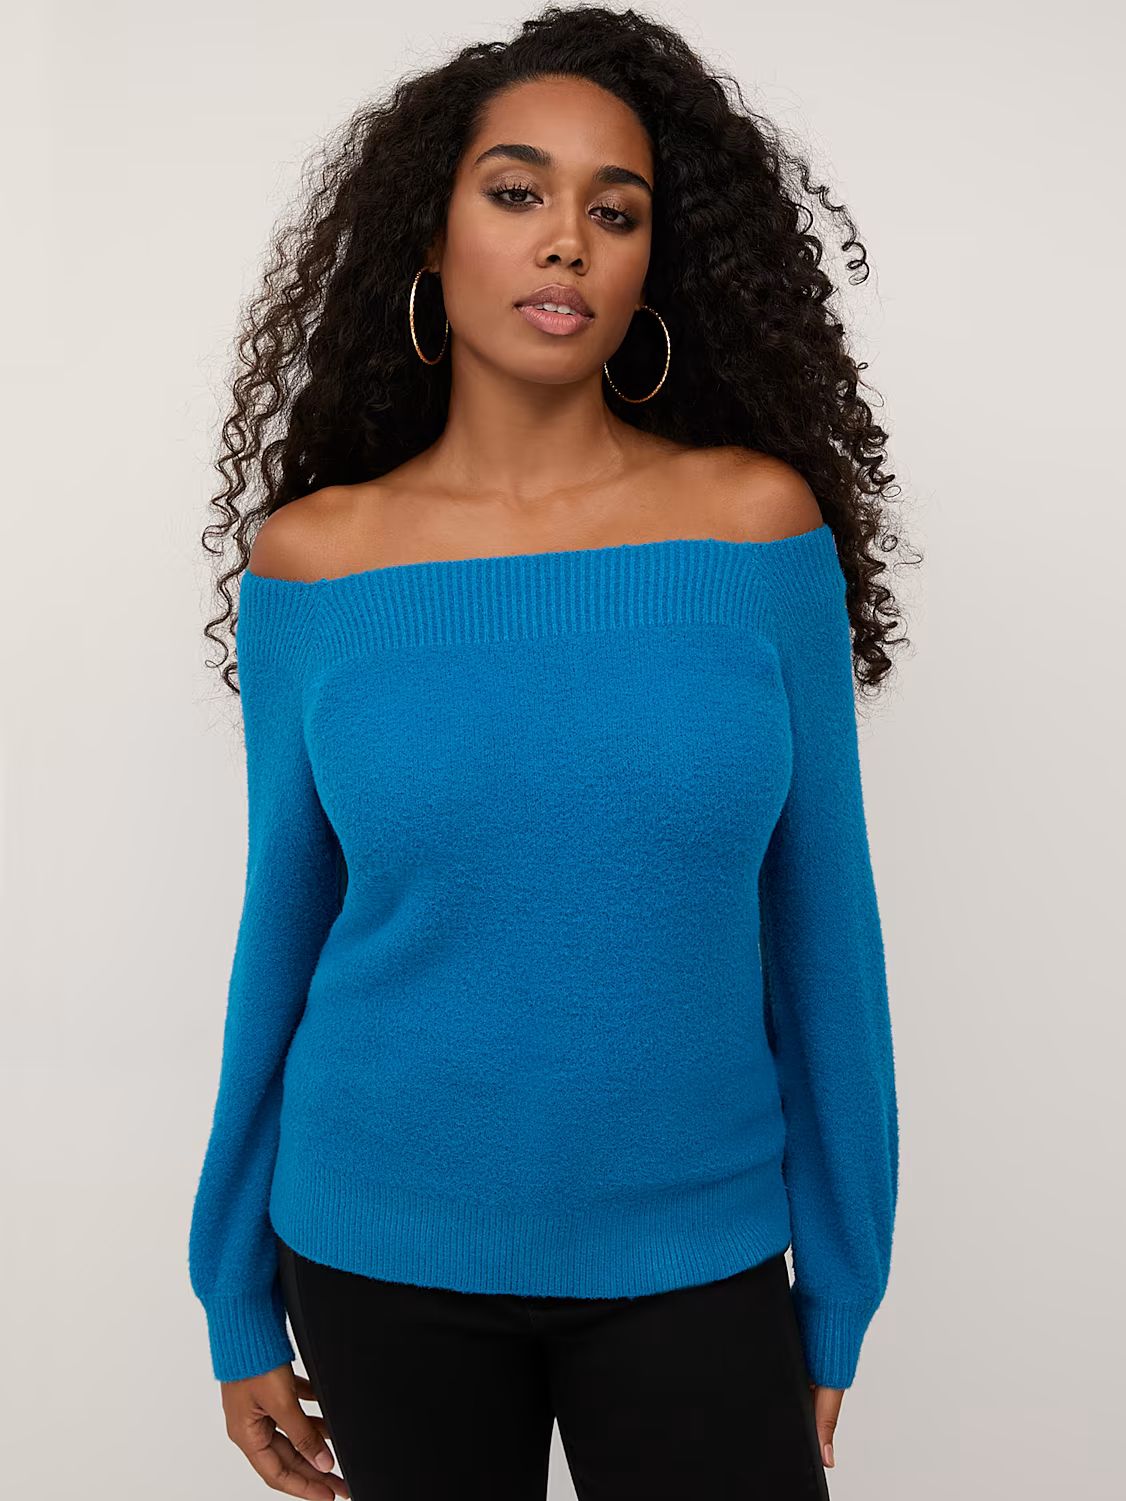 Off-The-Shoulder Super-Soft Sweater - New York & Company | New York & Company